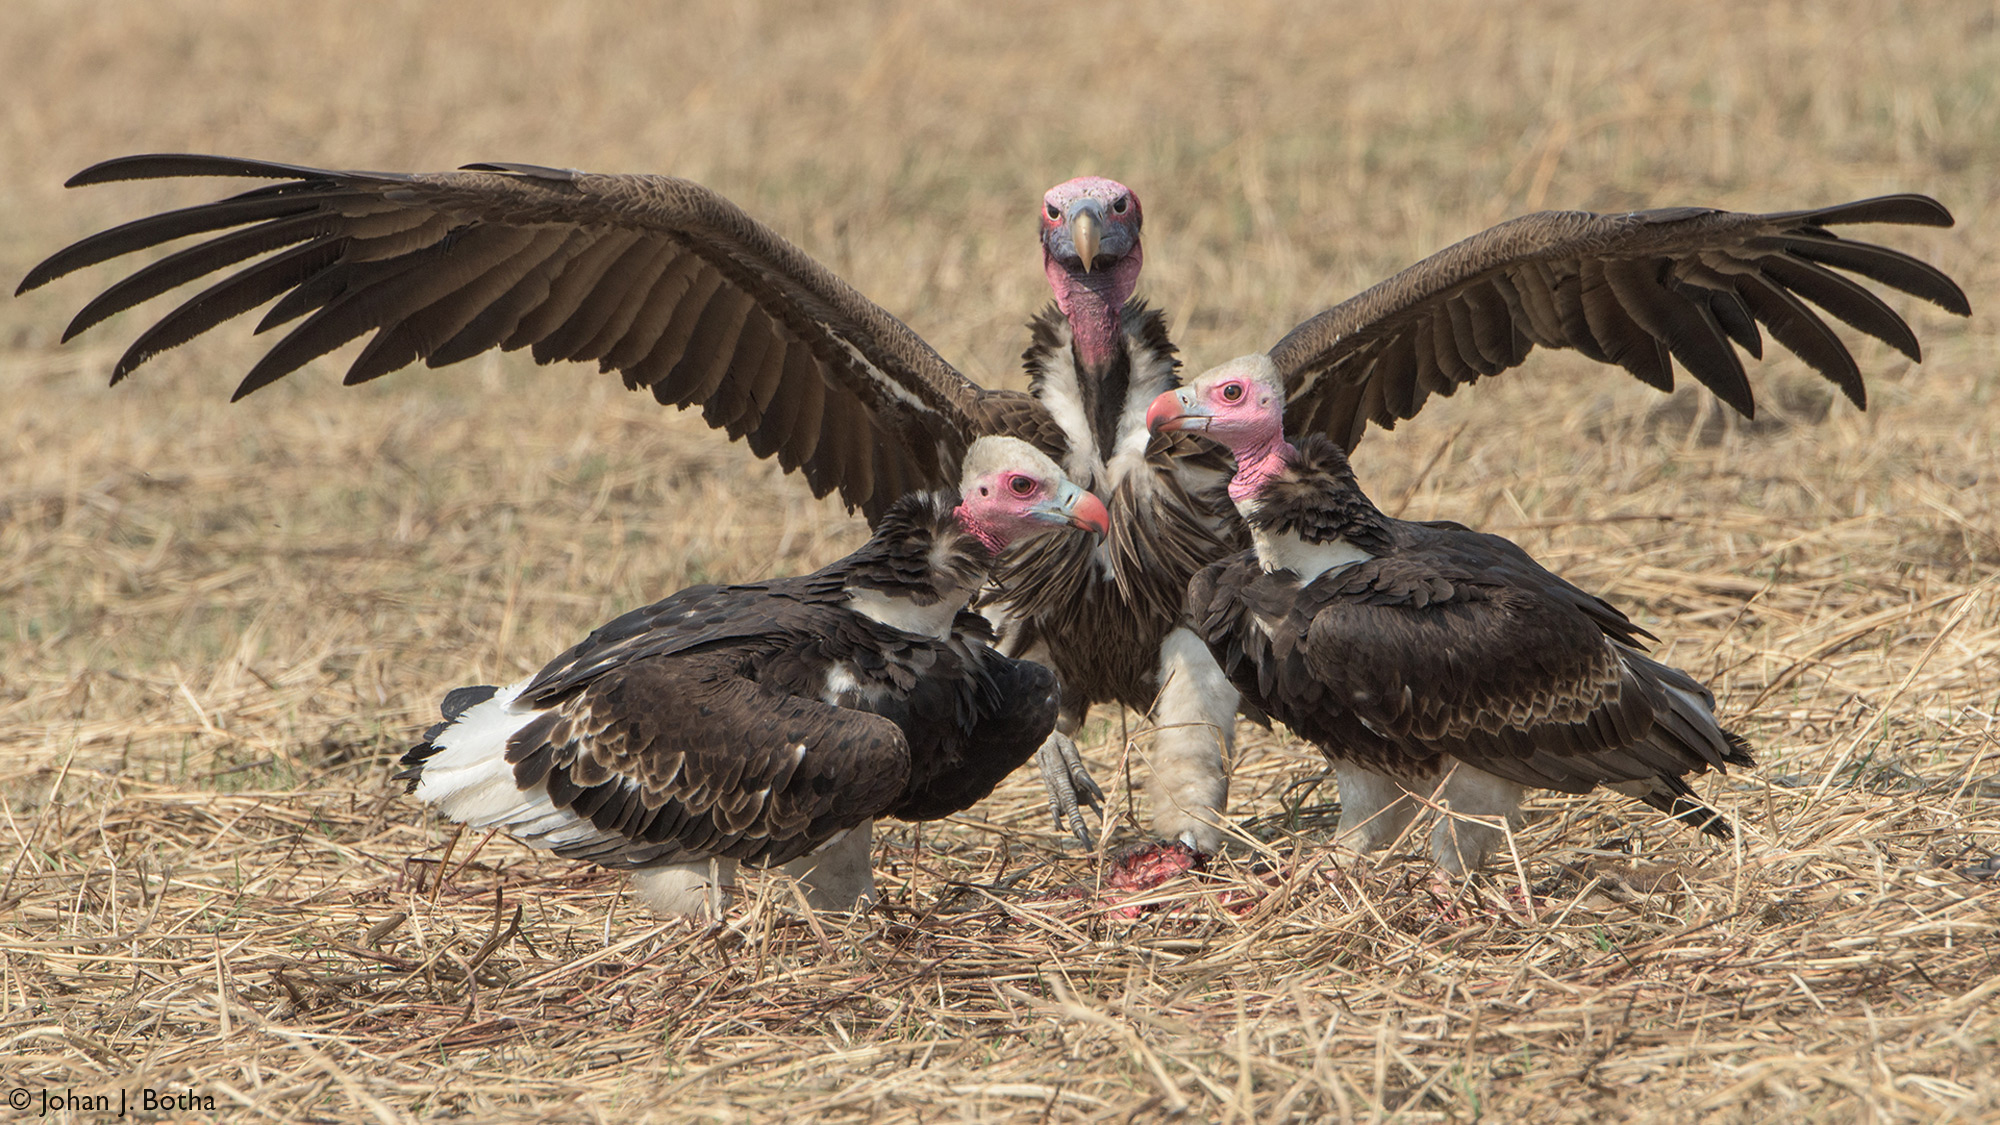 A lappet-faced vulture chases two white-headed vultures from carcass scraps in Kafue National Park, Zambia